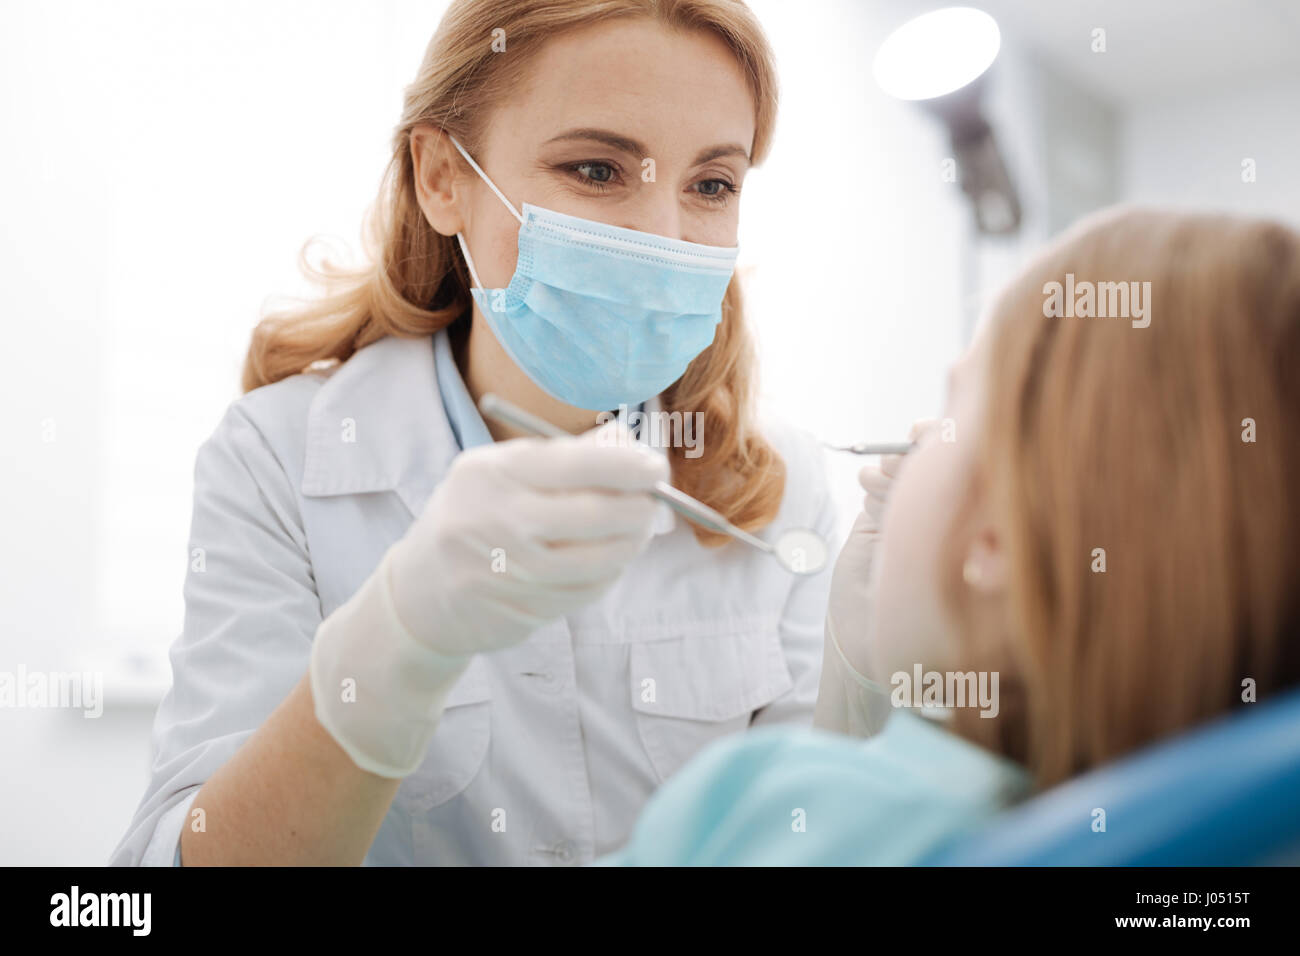 Sweet lovely doctor doing a routine checkup Stock Photo